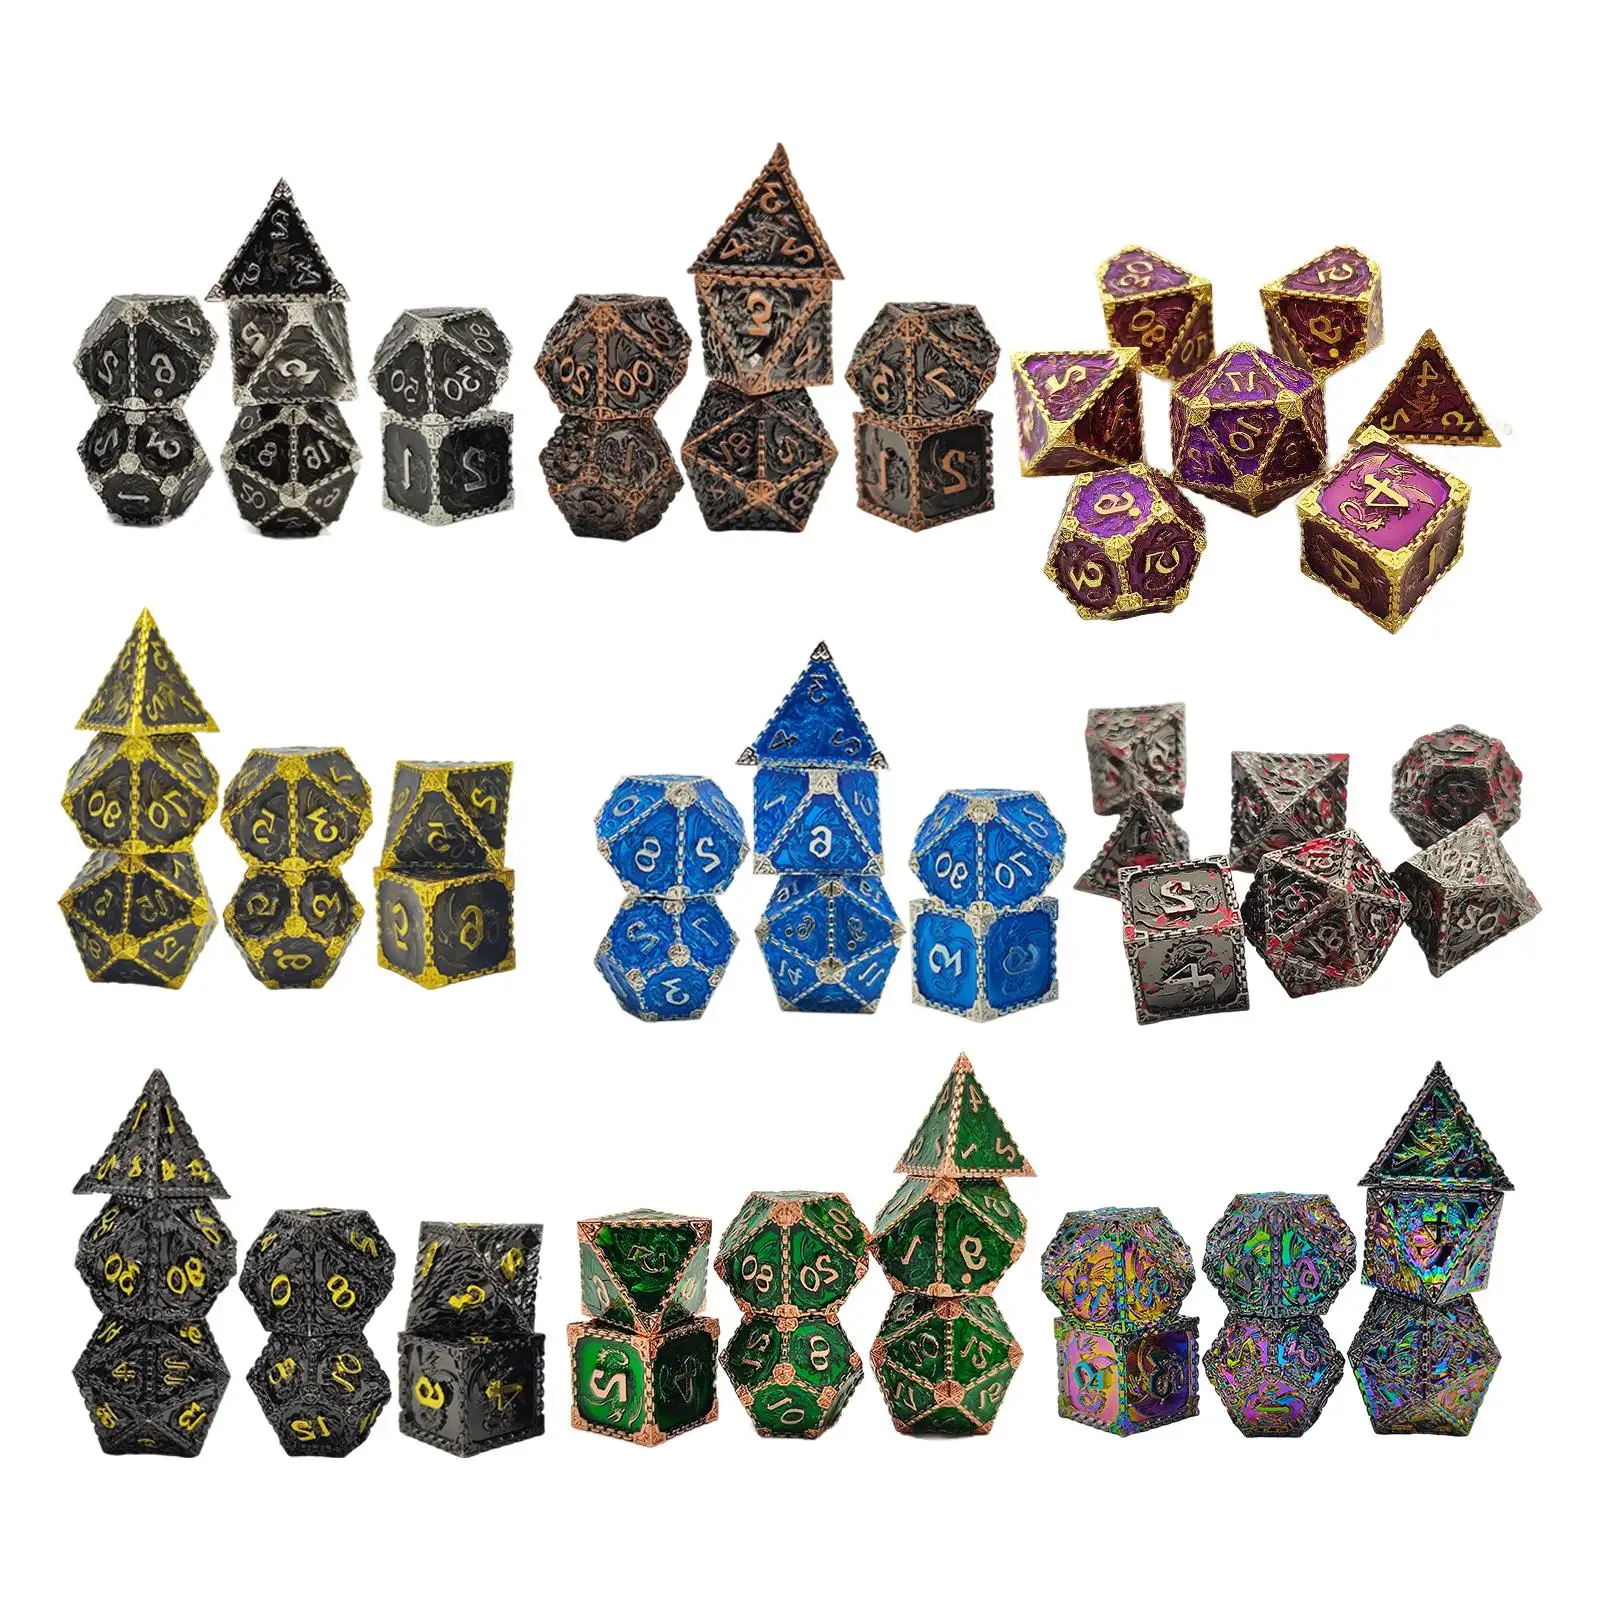 

Metal Polyhedral Dice Family Games Game Accessories Board Games D4 D6 D8 D10 D12 D20 7 Pieces Role Playing Dice for DND RPG MTG